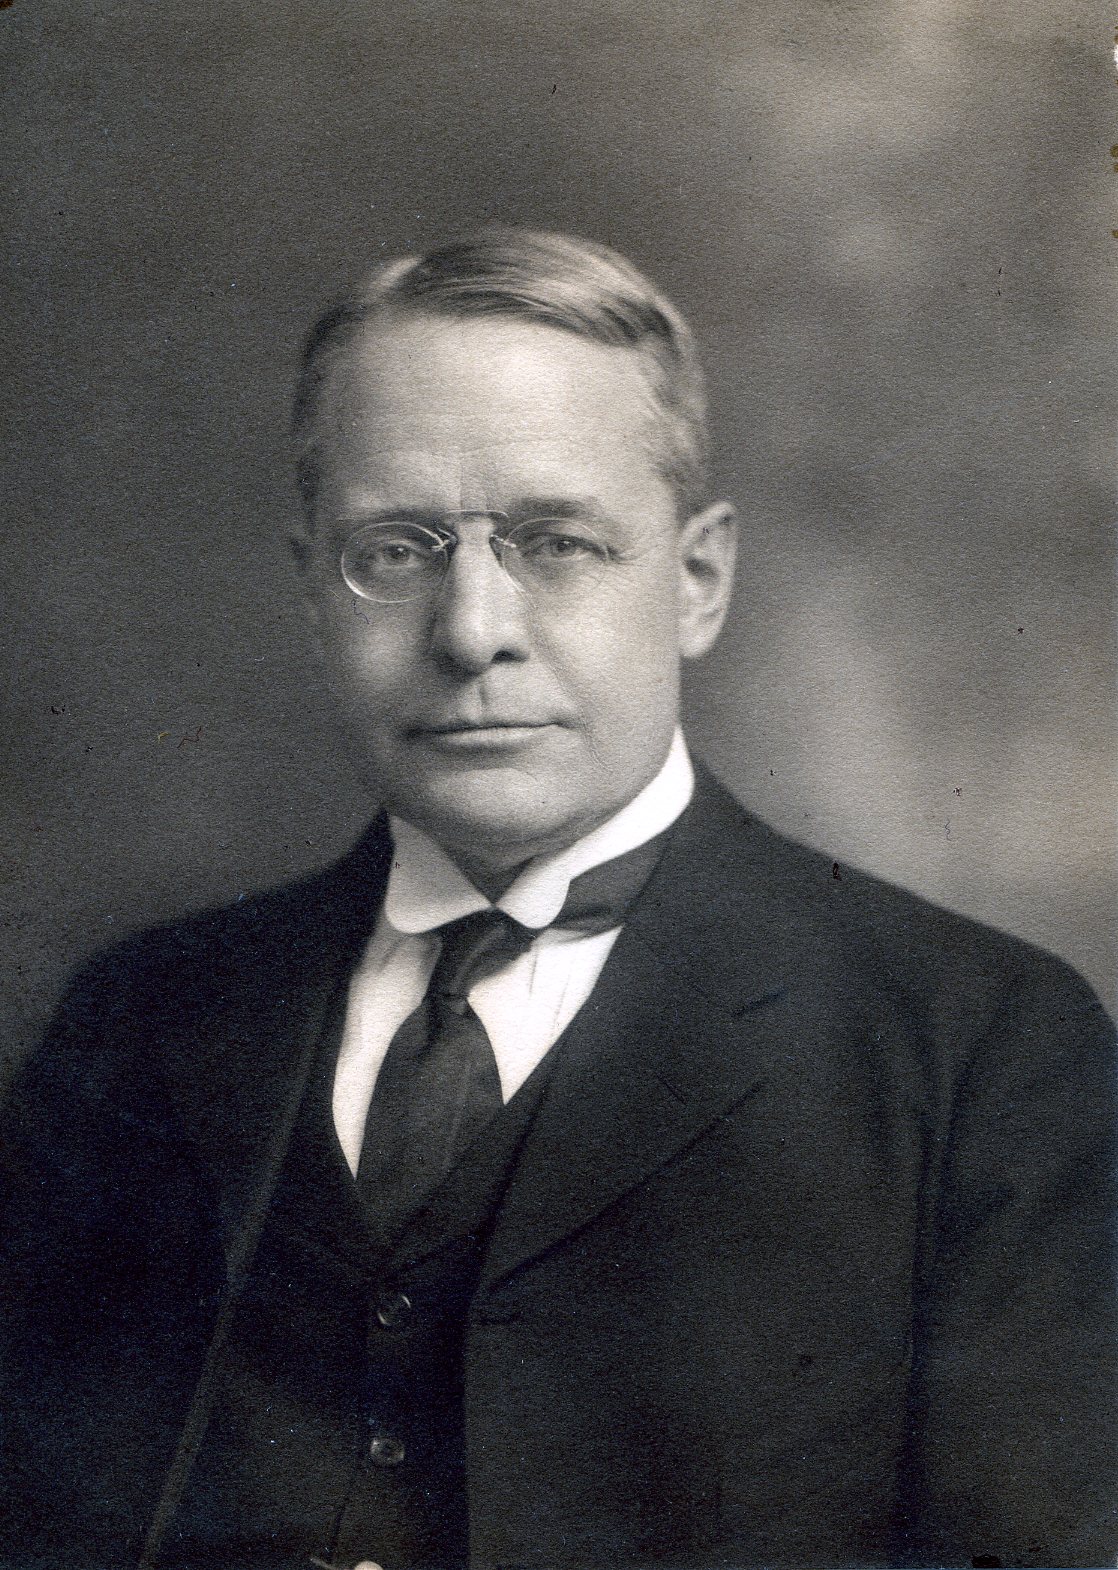 Member portrait of George F. Canfield